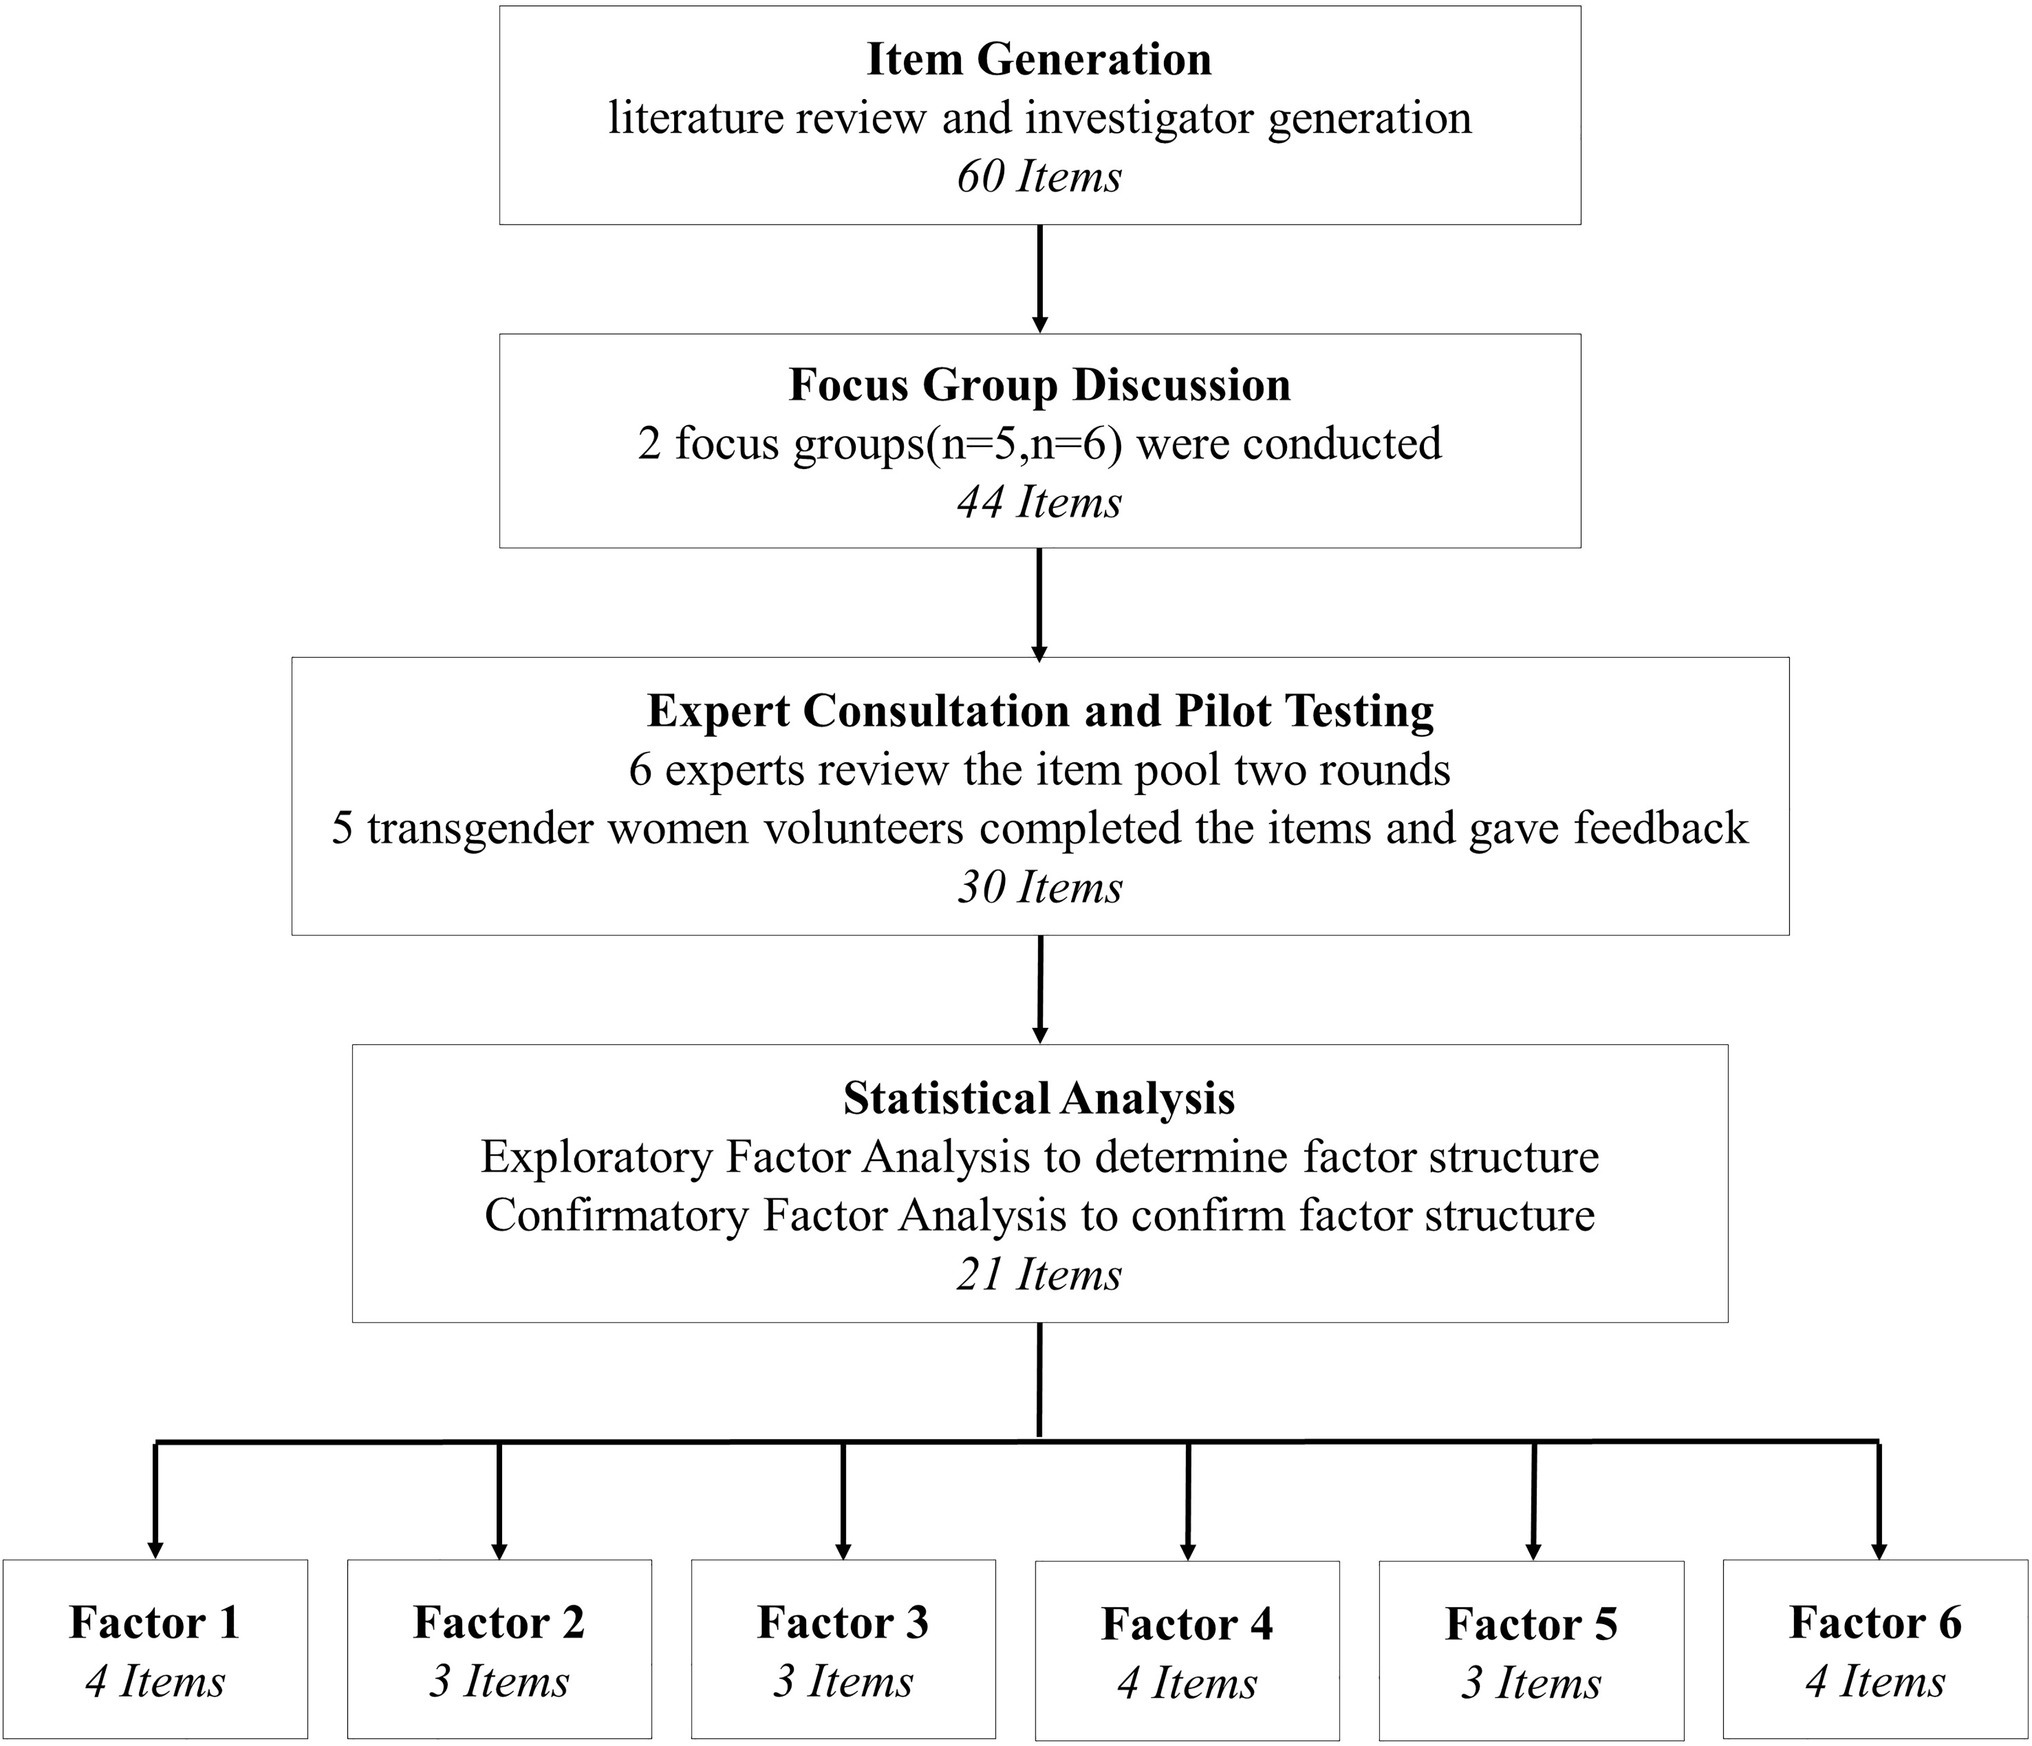 Frontiers | Development and Psychometric Evaluation of the Gender